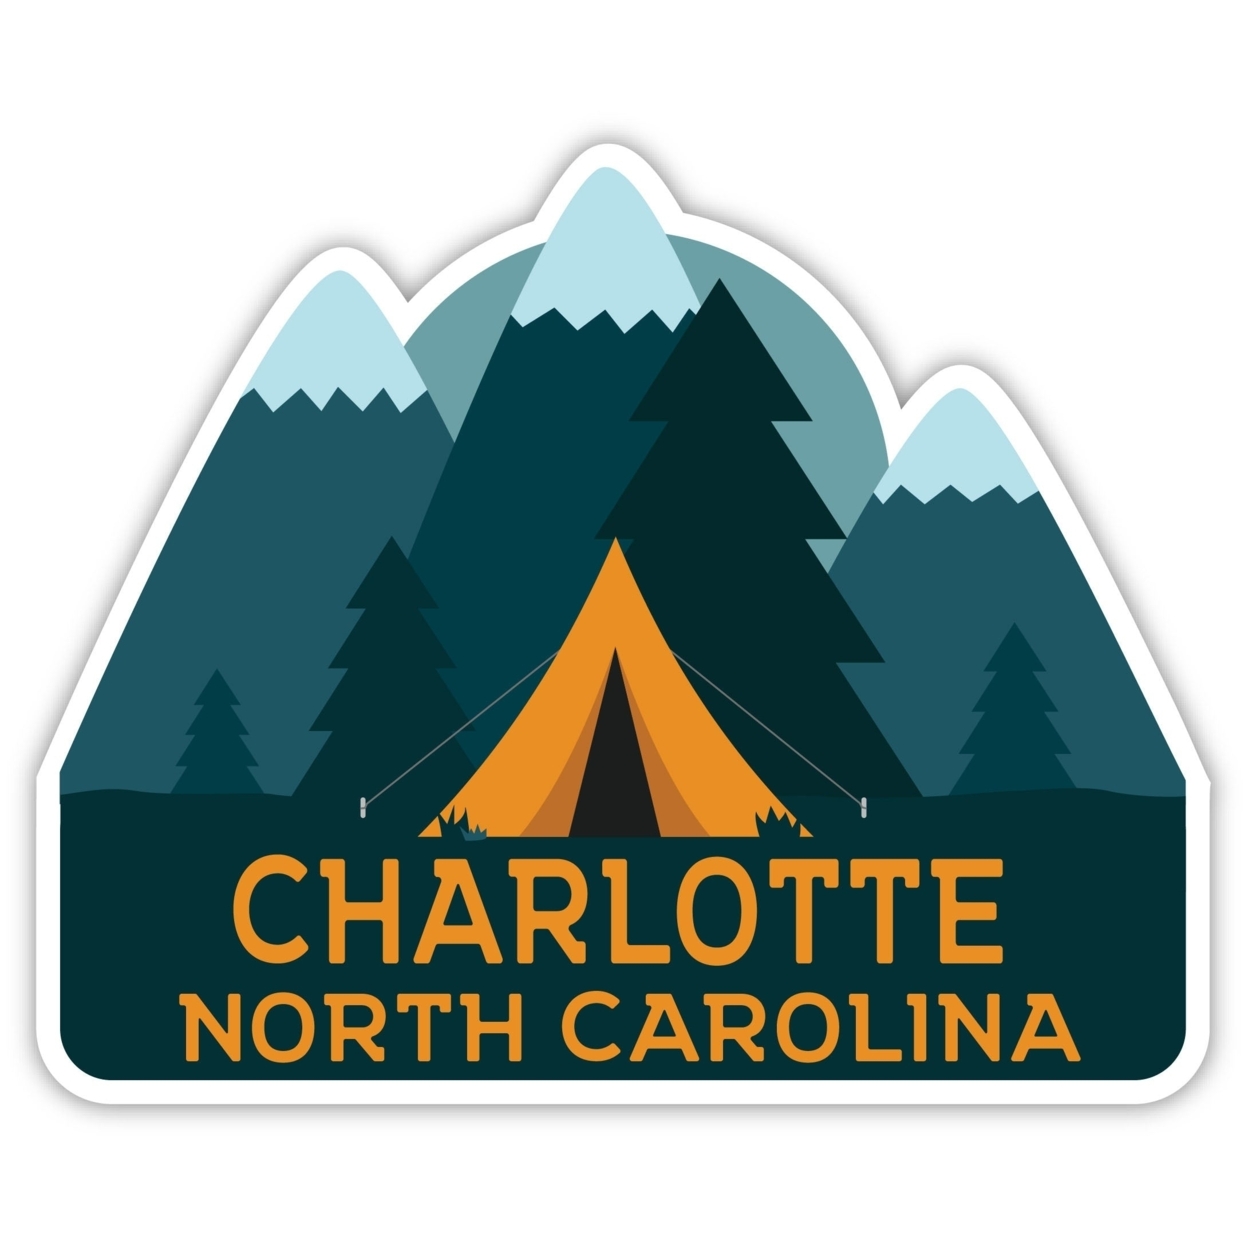 Charlotte North Carolina Souvenir Decorative Stickers (Choose Theme And Size) - 4-Pack, 4-Inch, Tent